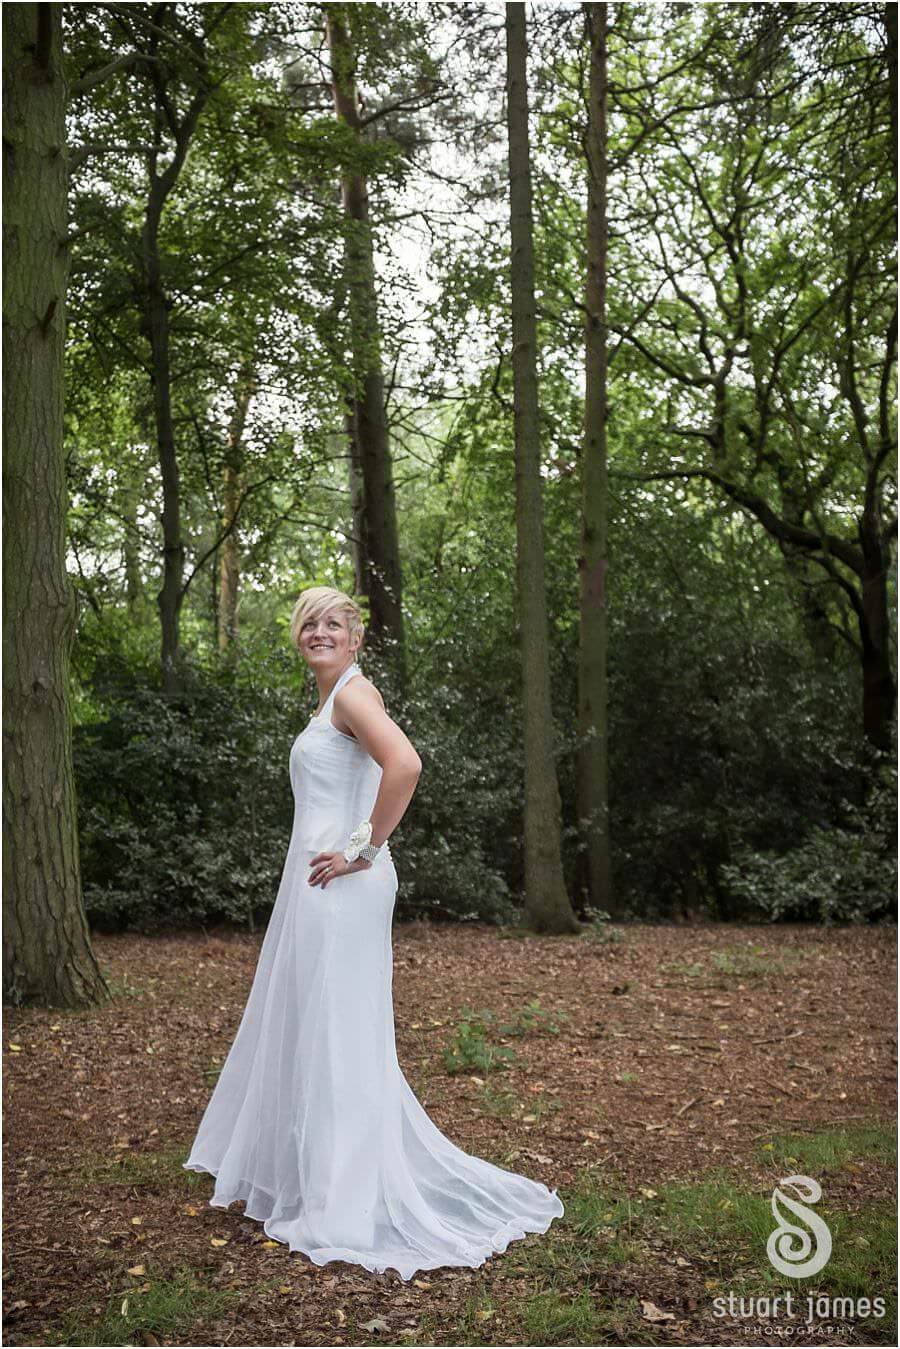 Creative classical photos of couple by Bracebridge Pool at The Boat House, Sutton Park in Sutton Coldfield by Documentary Wedding Photographer Stuart James